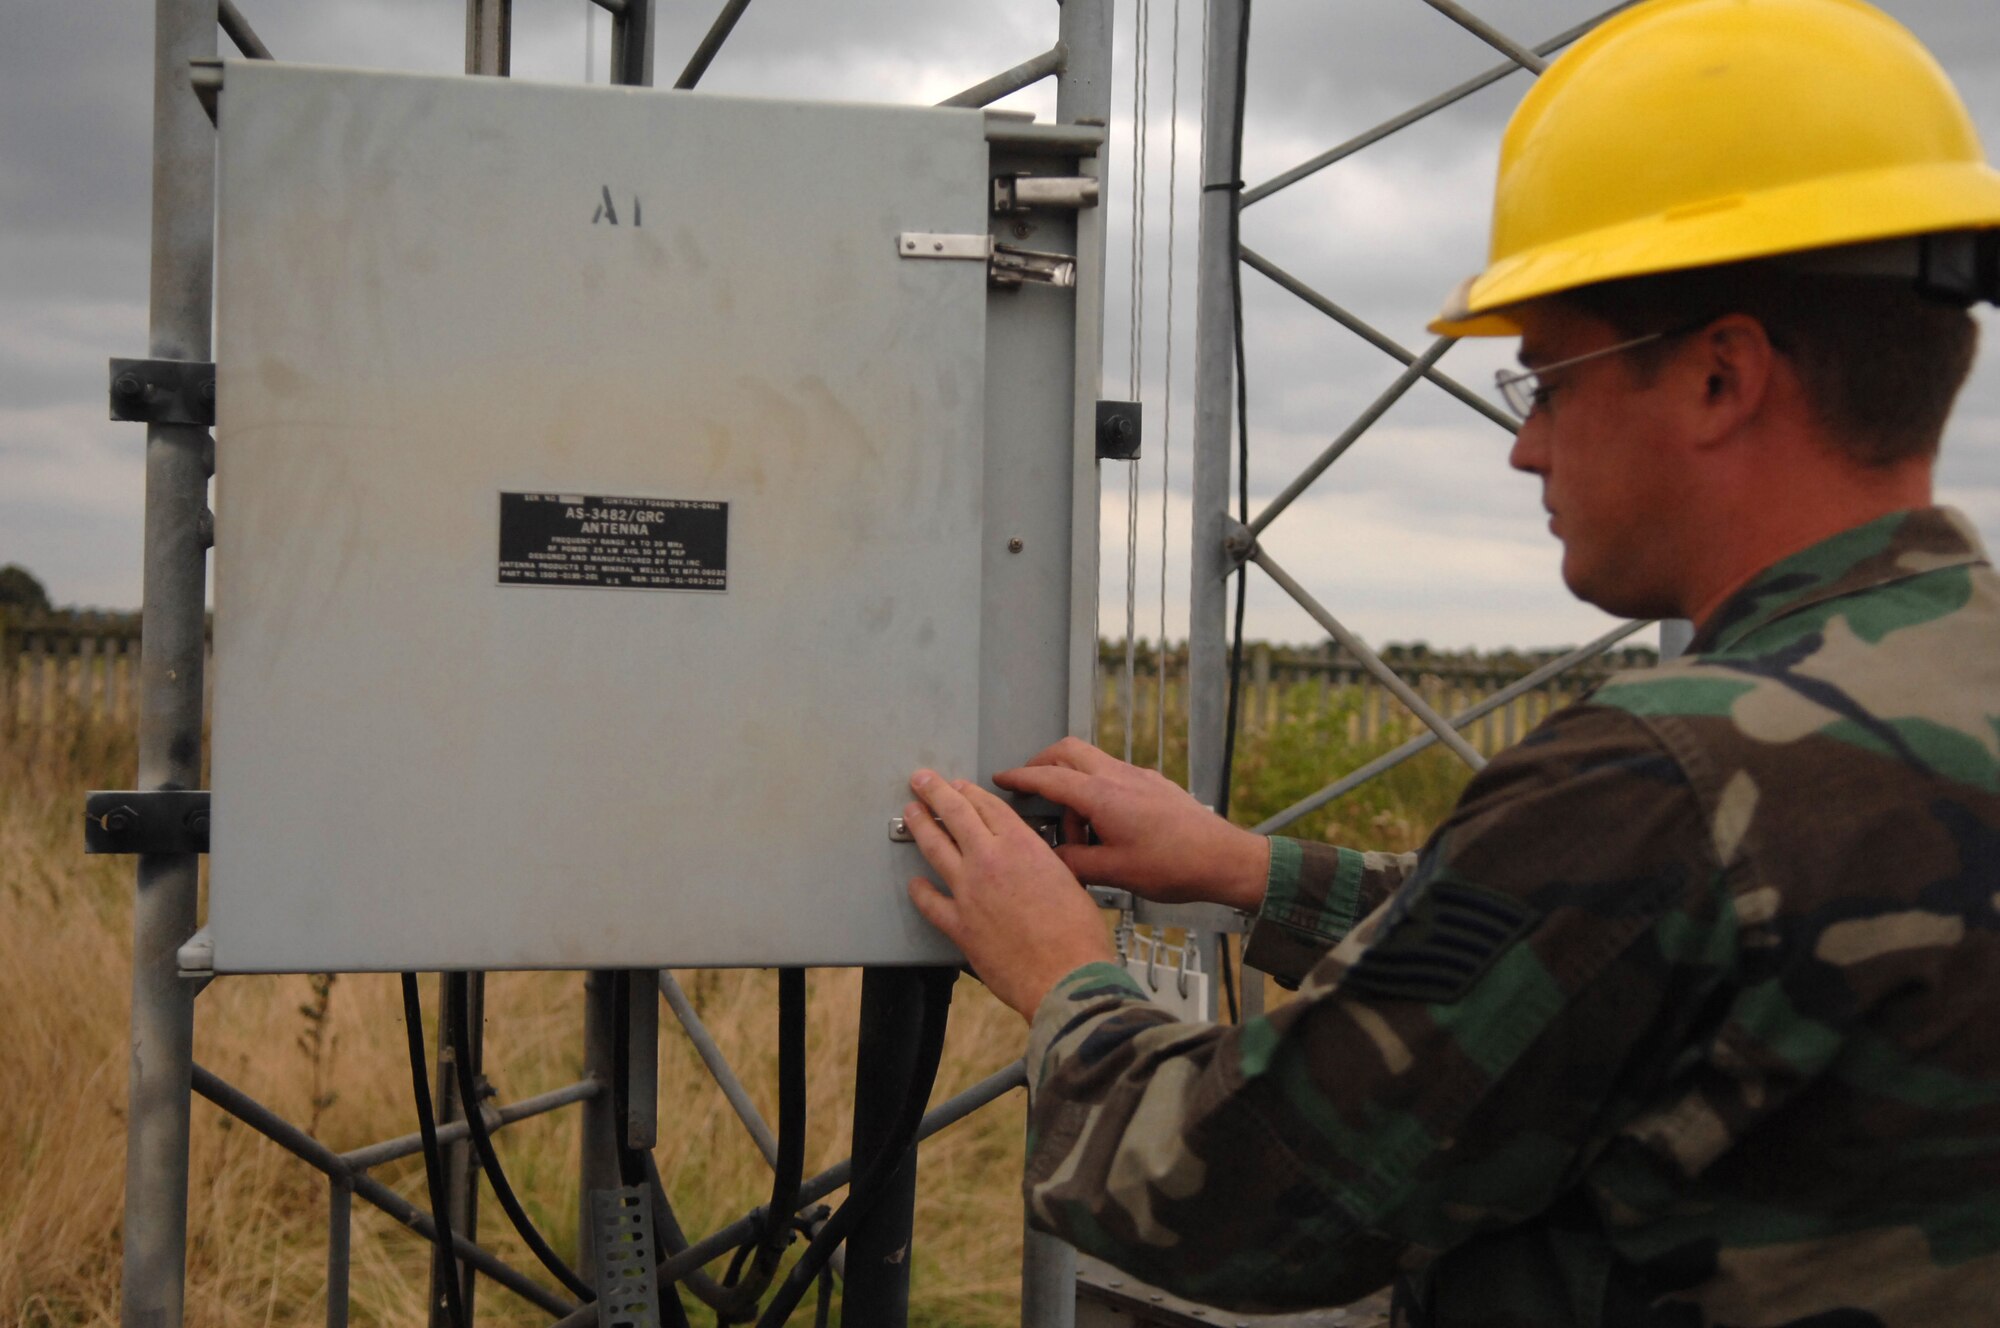 U.S. Air Force Tech. Sgt. Scott Dunbar 1st Communications Maintenance Squadron, accesses the control panel to a radio tower. Sergeant Dunbar is a member of the Cable and Antenna Theater Maintenance Team who travel routinely throughout Europe maintaining the communications capability force across the Atlantic. (U.S. Air Force photo by Tech. Sgt. Michael Voss)